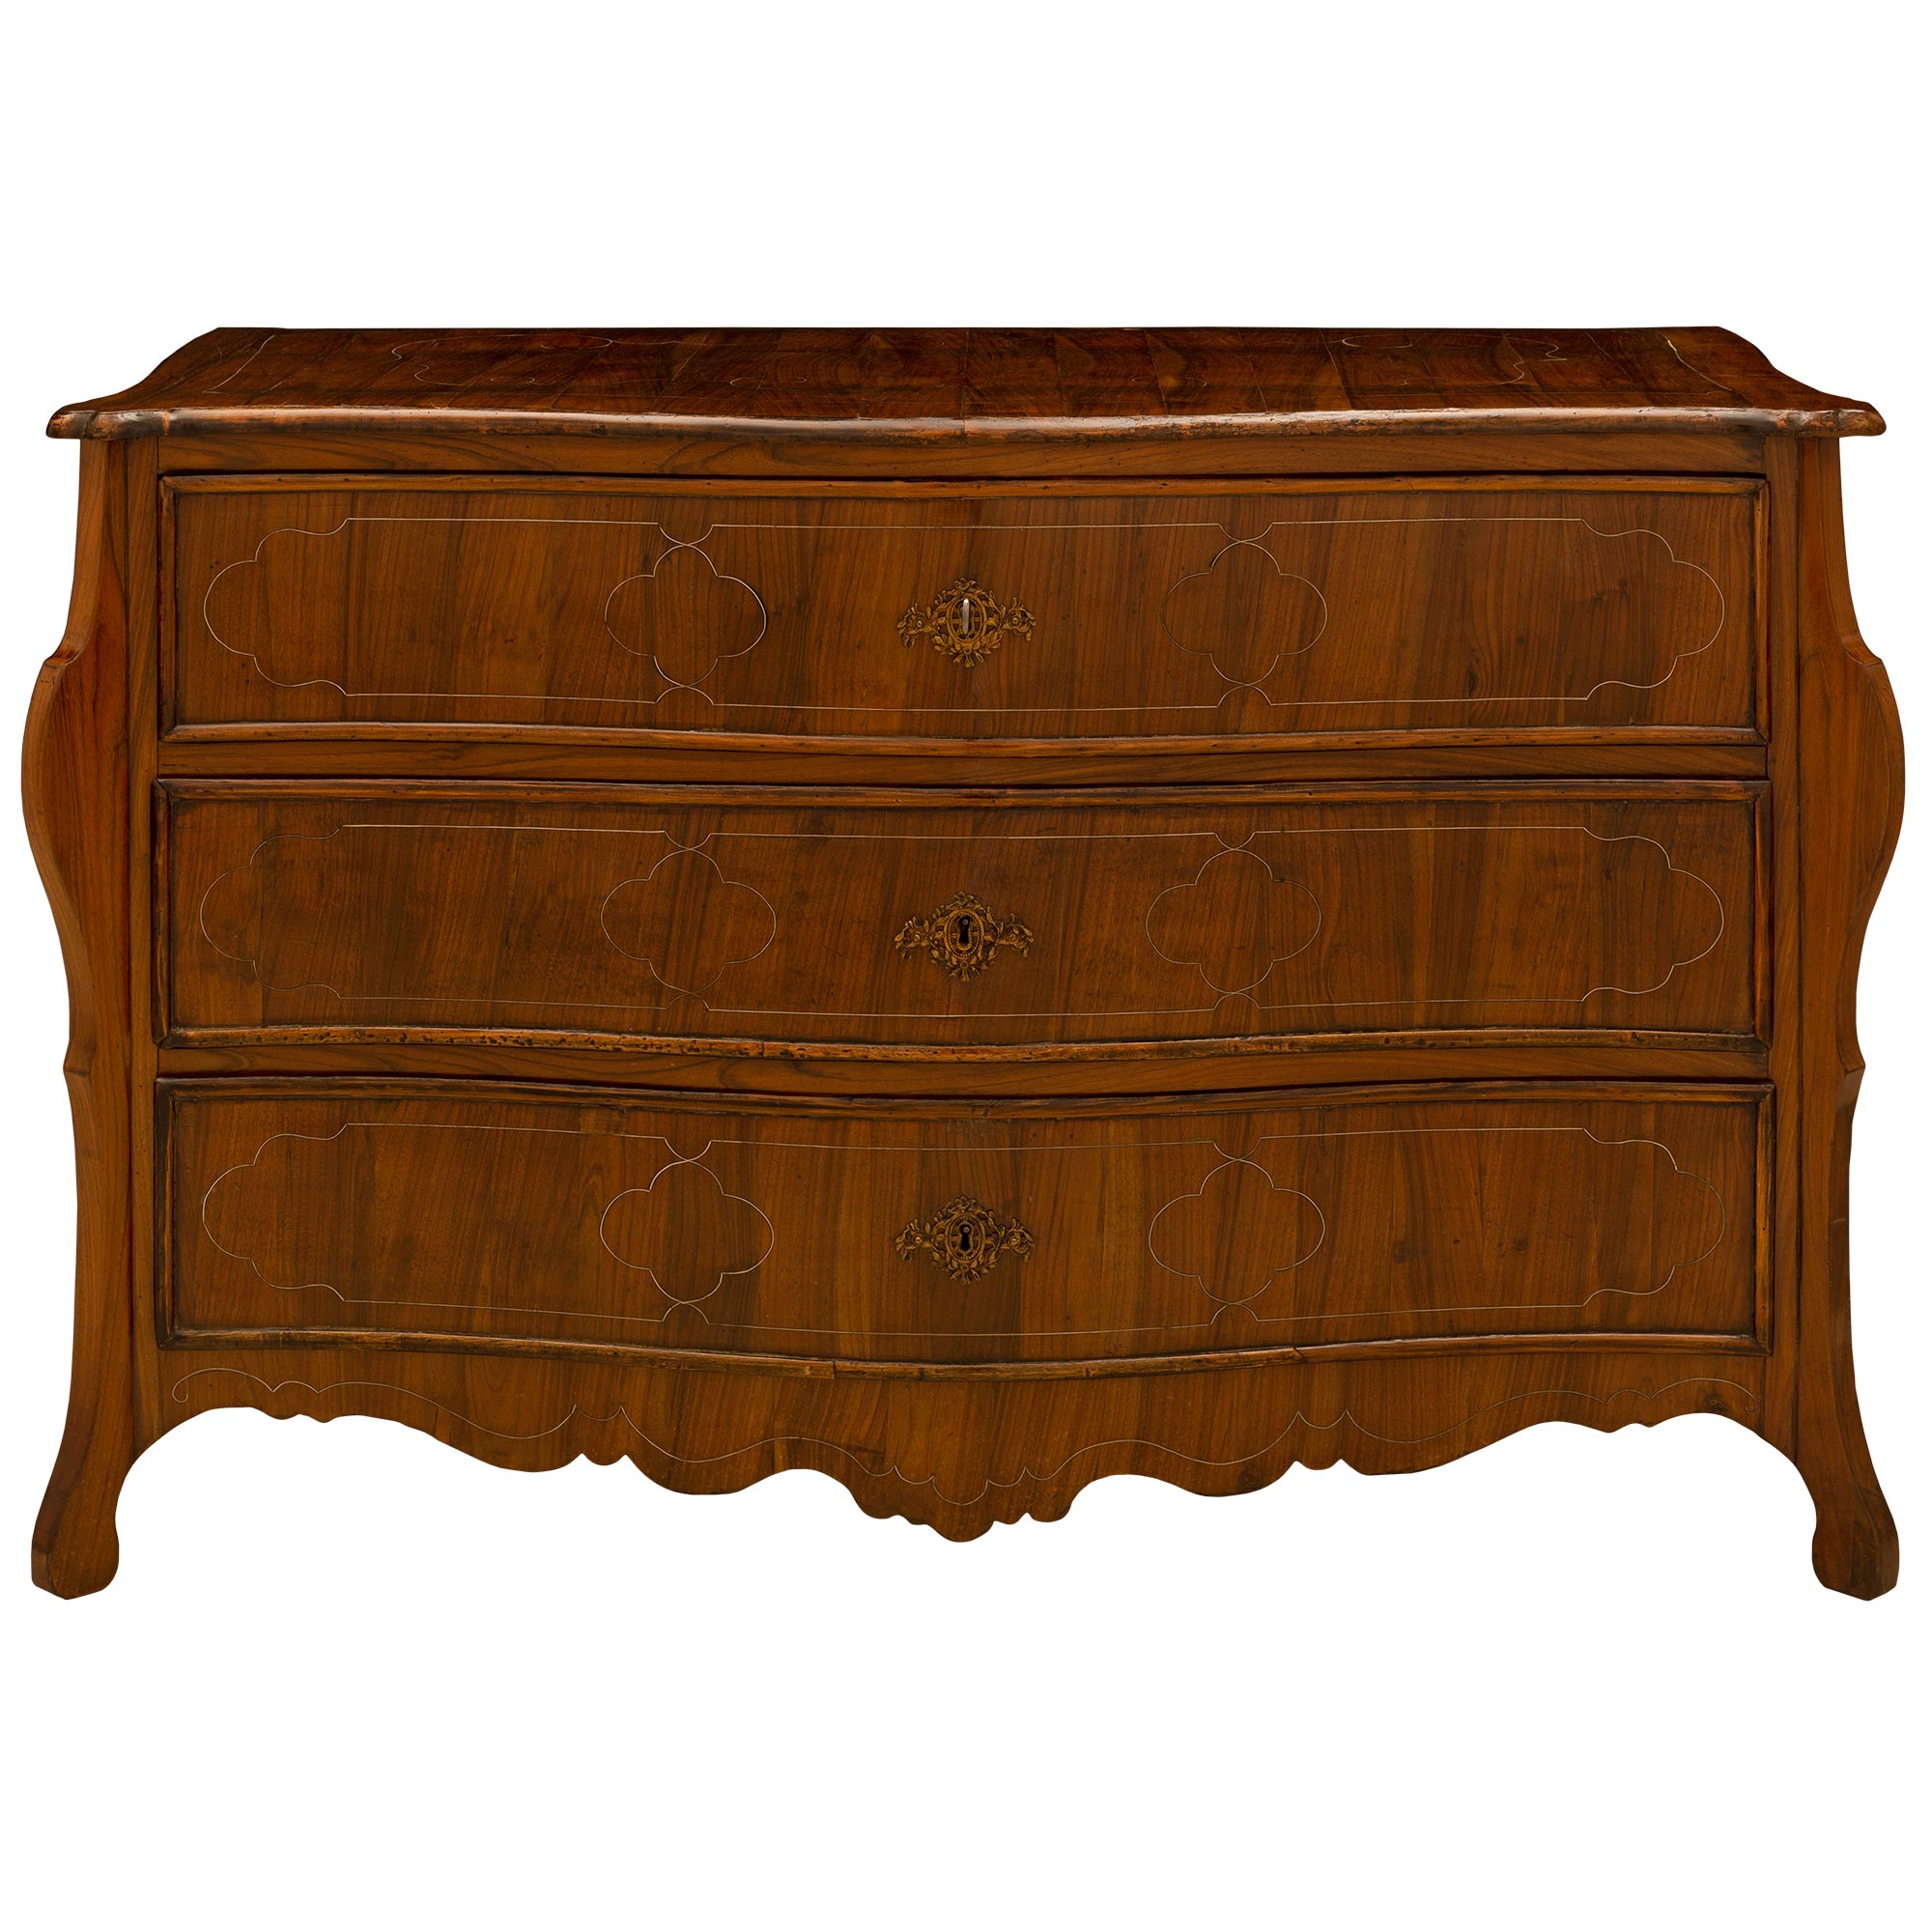 Italian 18th Century Louis XIV Period Walnut Inlaid Bombée Commode For Sale